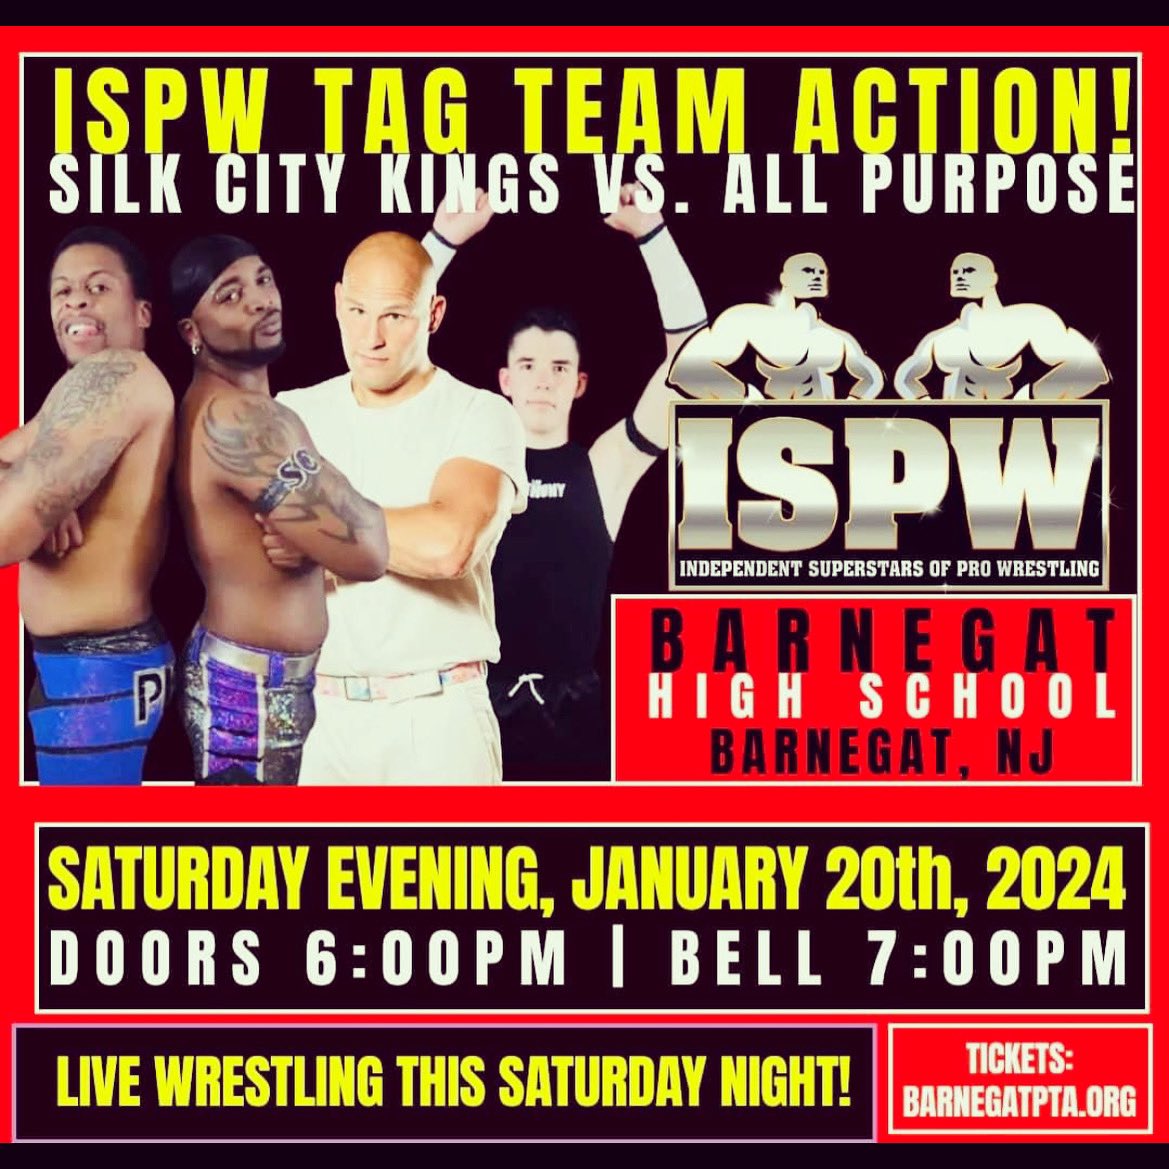 Yo @kennybengal It’s their fault why we aren’t @ispwwrestling Tag Team Champions rn. So tomorrow night we gonna see All Purpose n give them an All Purpose ass whippin. 

#bigsck #bulldog #bengal #allday #tagteamwrestling #ispw #indiewrestling #patersonnj #silkcity #kings